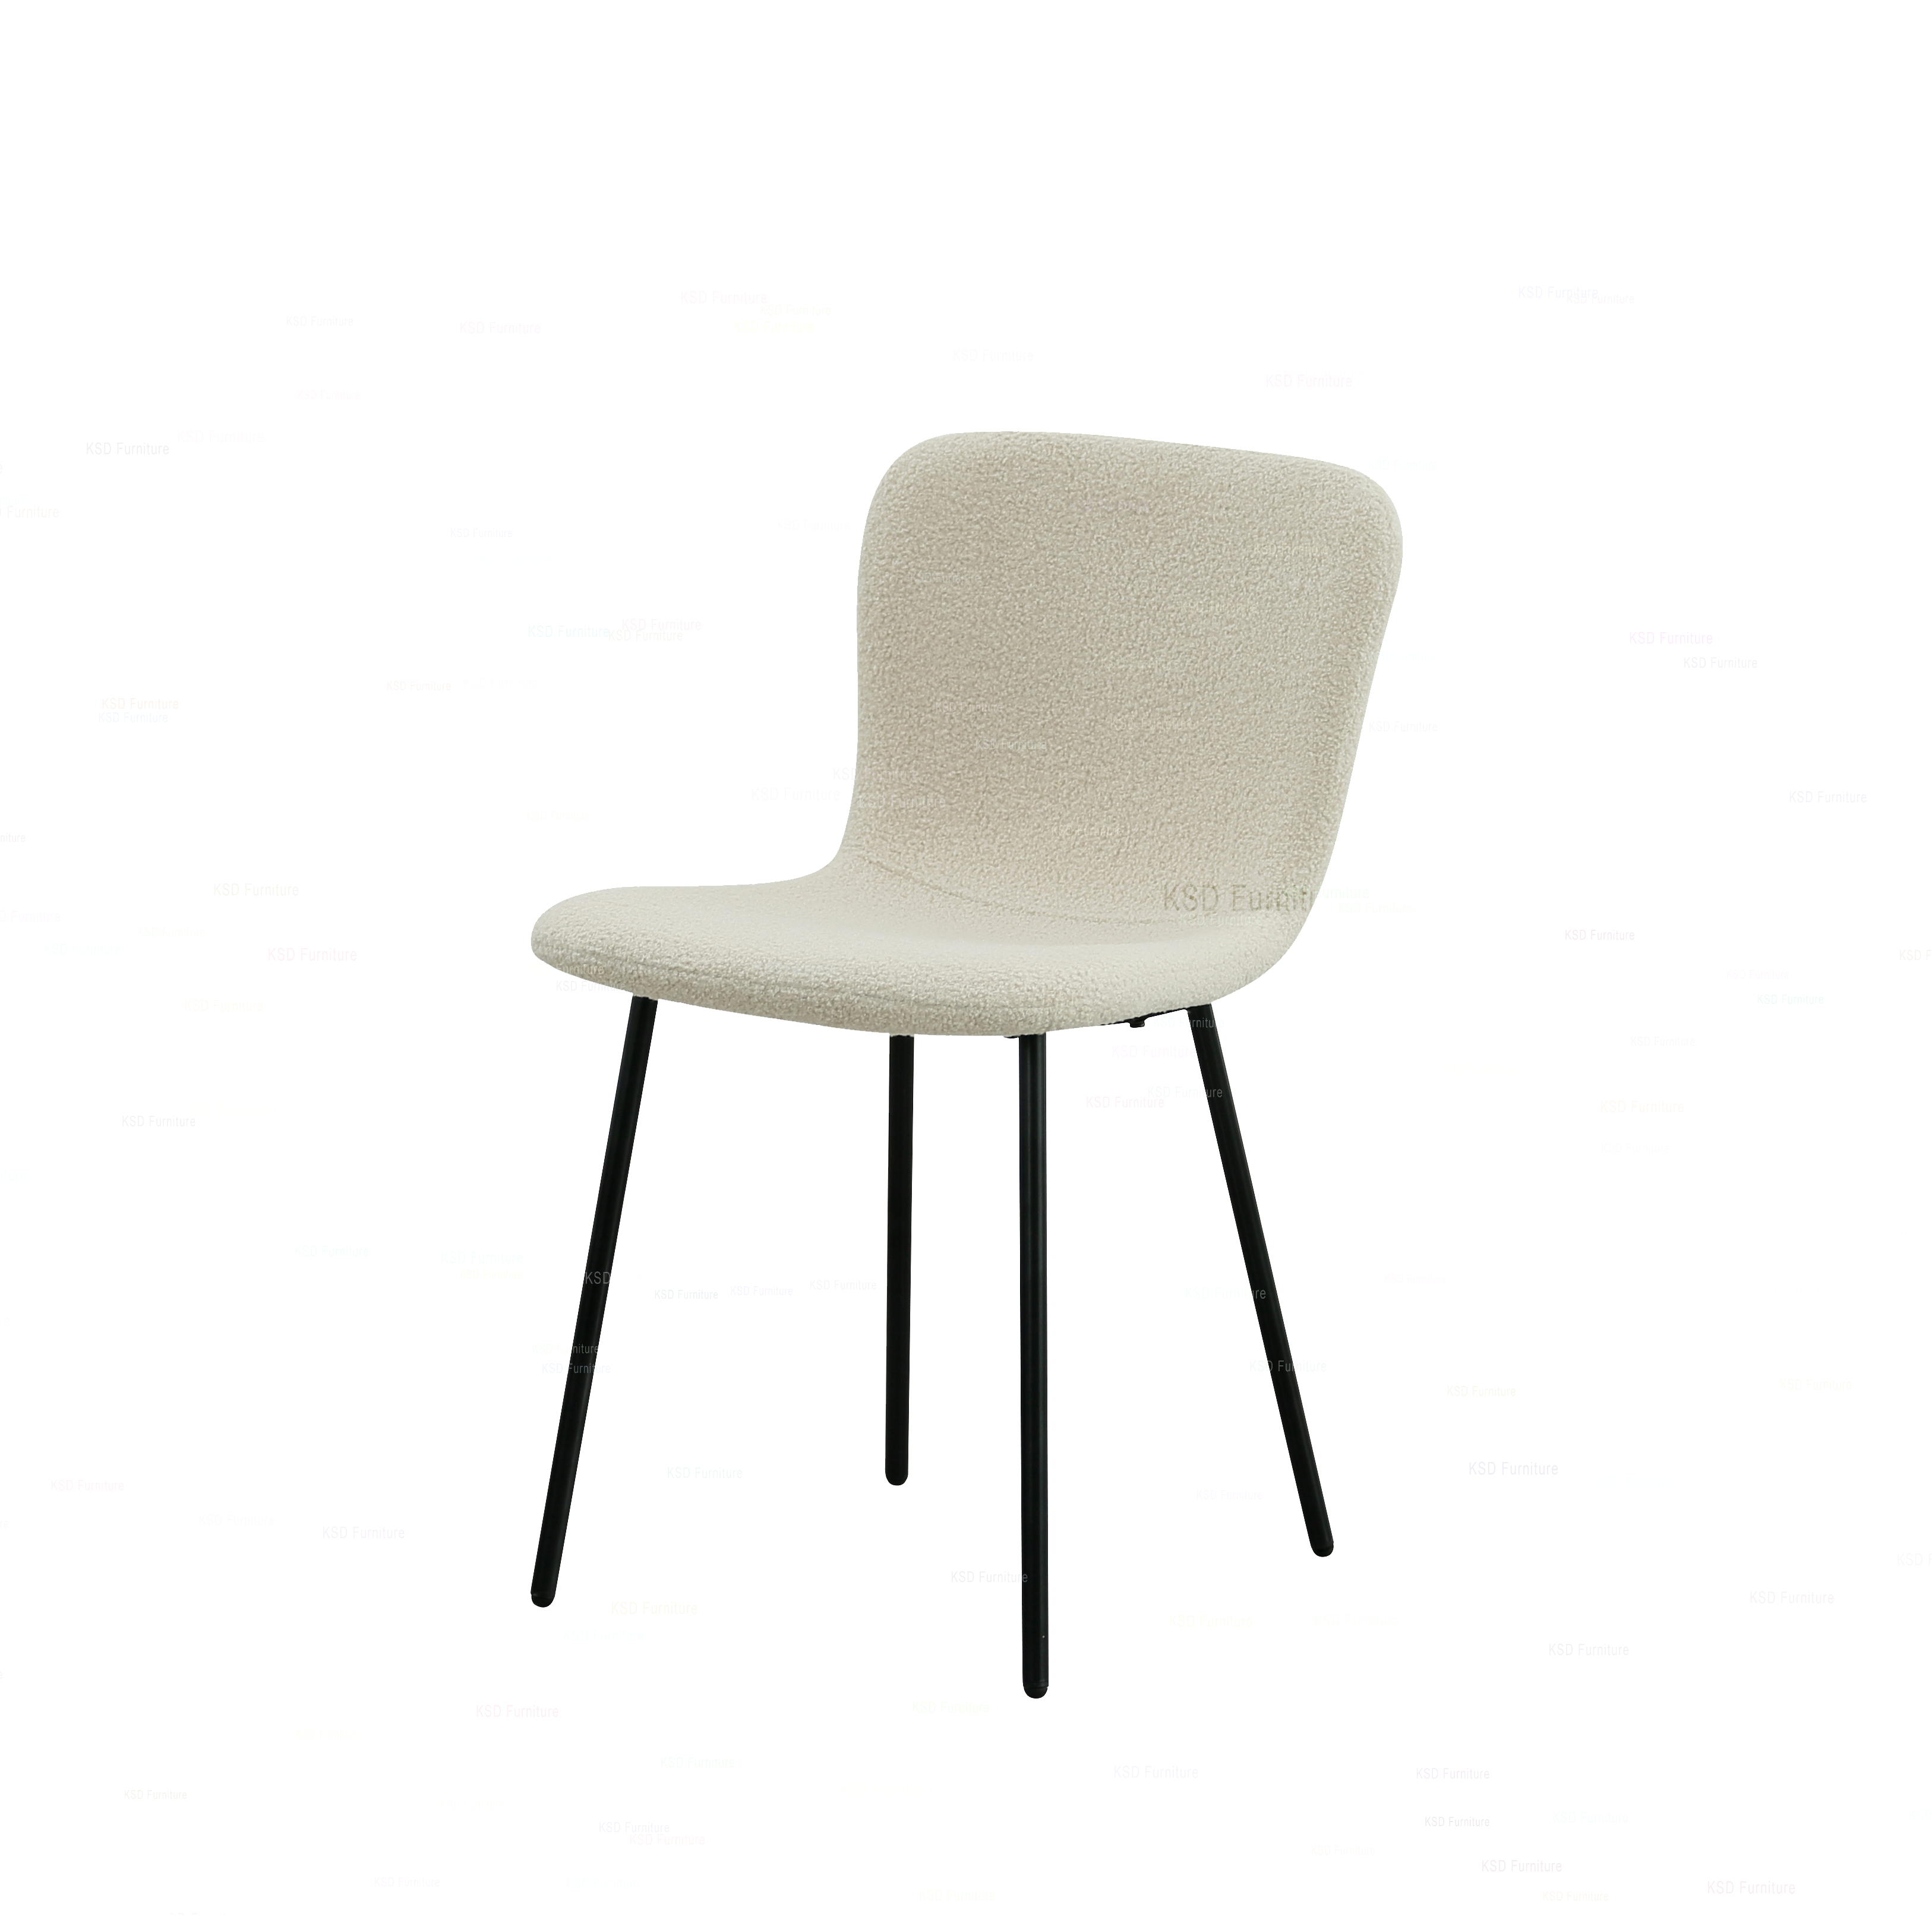 Best selling dining chair